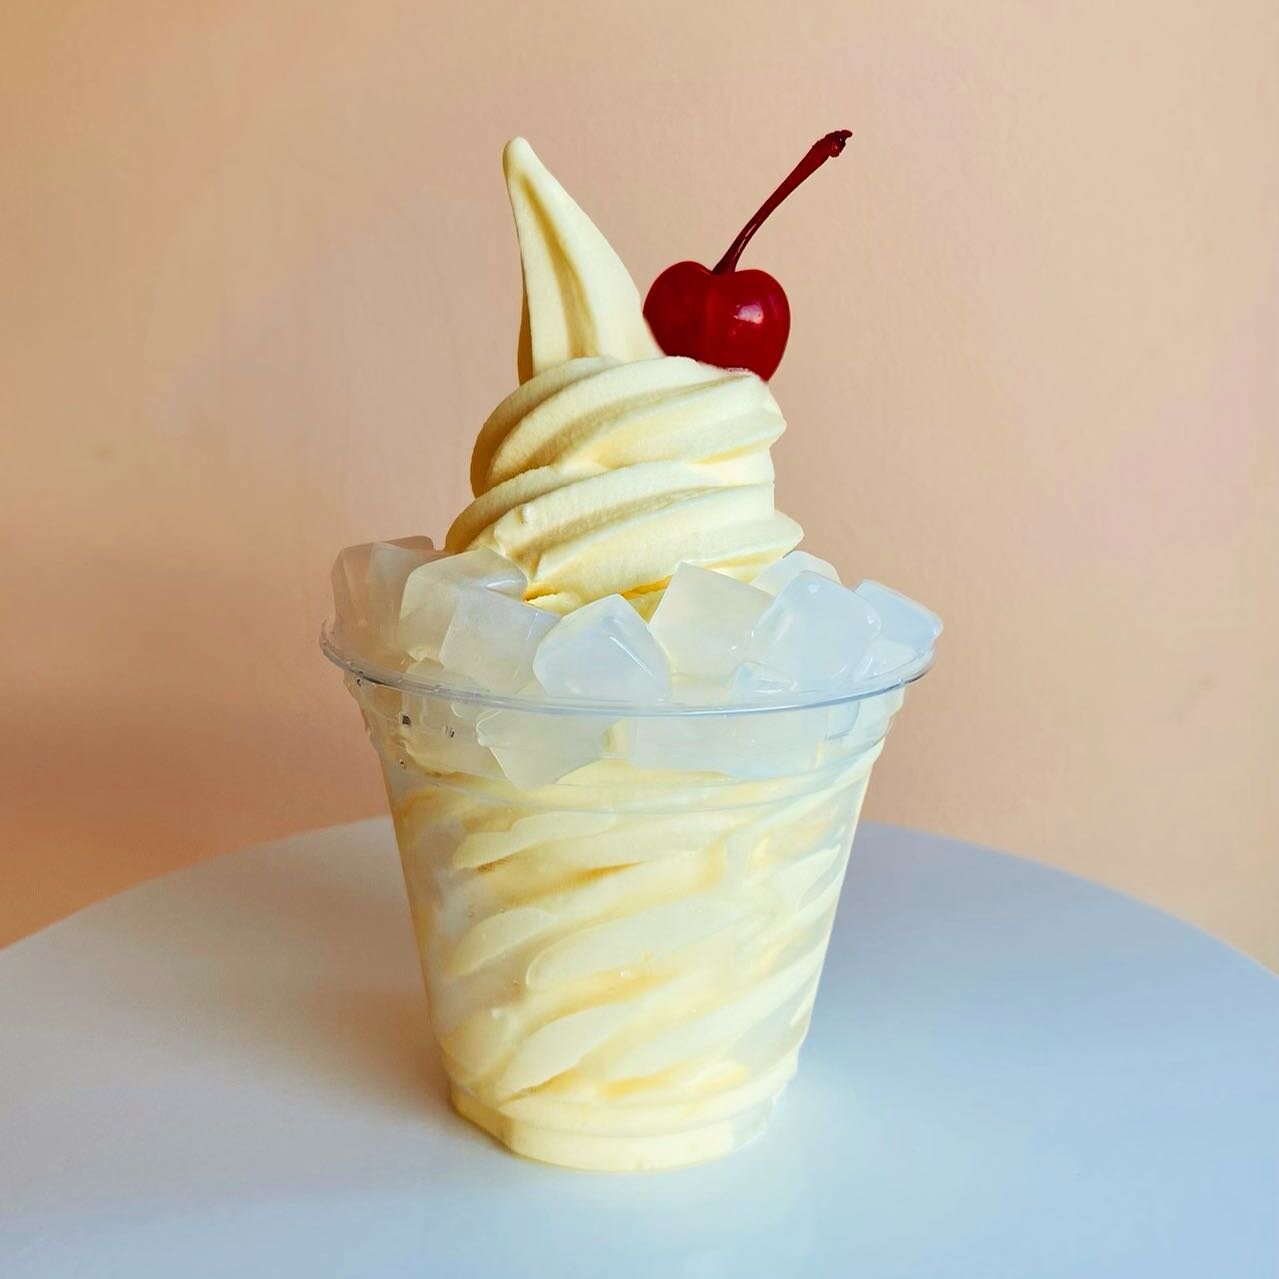 Now swirling Pineapple Dole Whip at Iceskimo Eastlake! 🍍💛